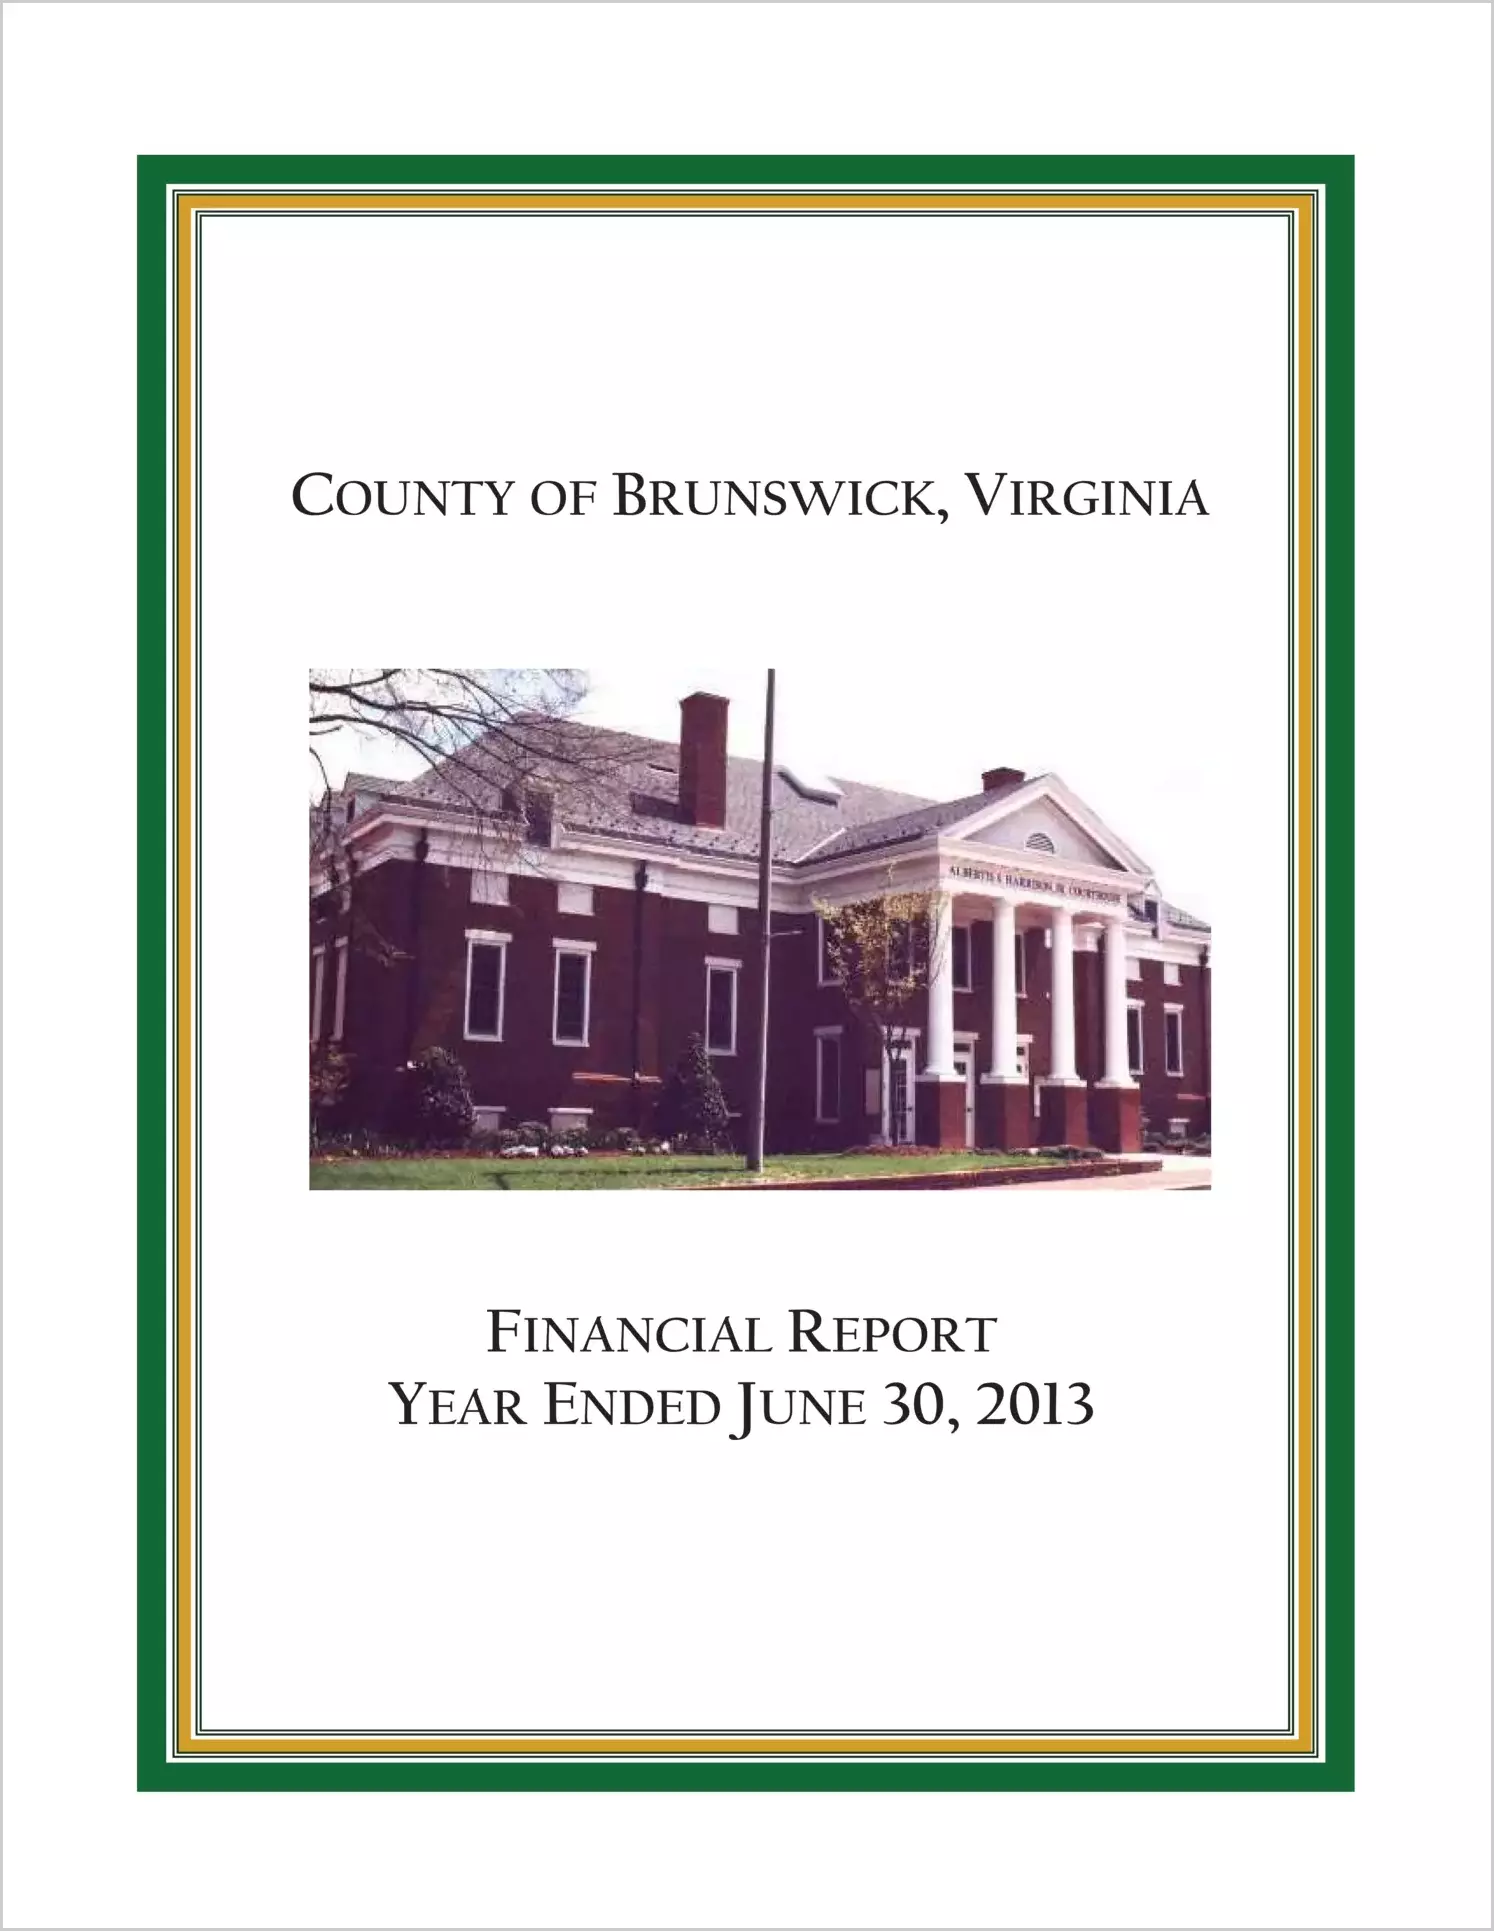 2013 Annual Financial Report for County of Brunswick